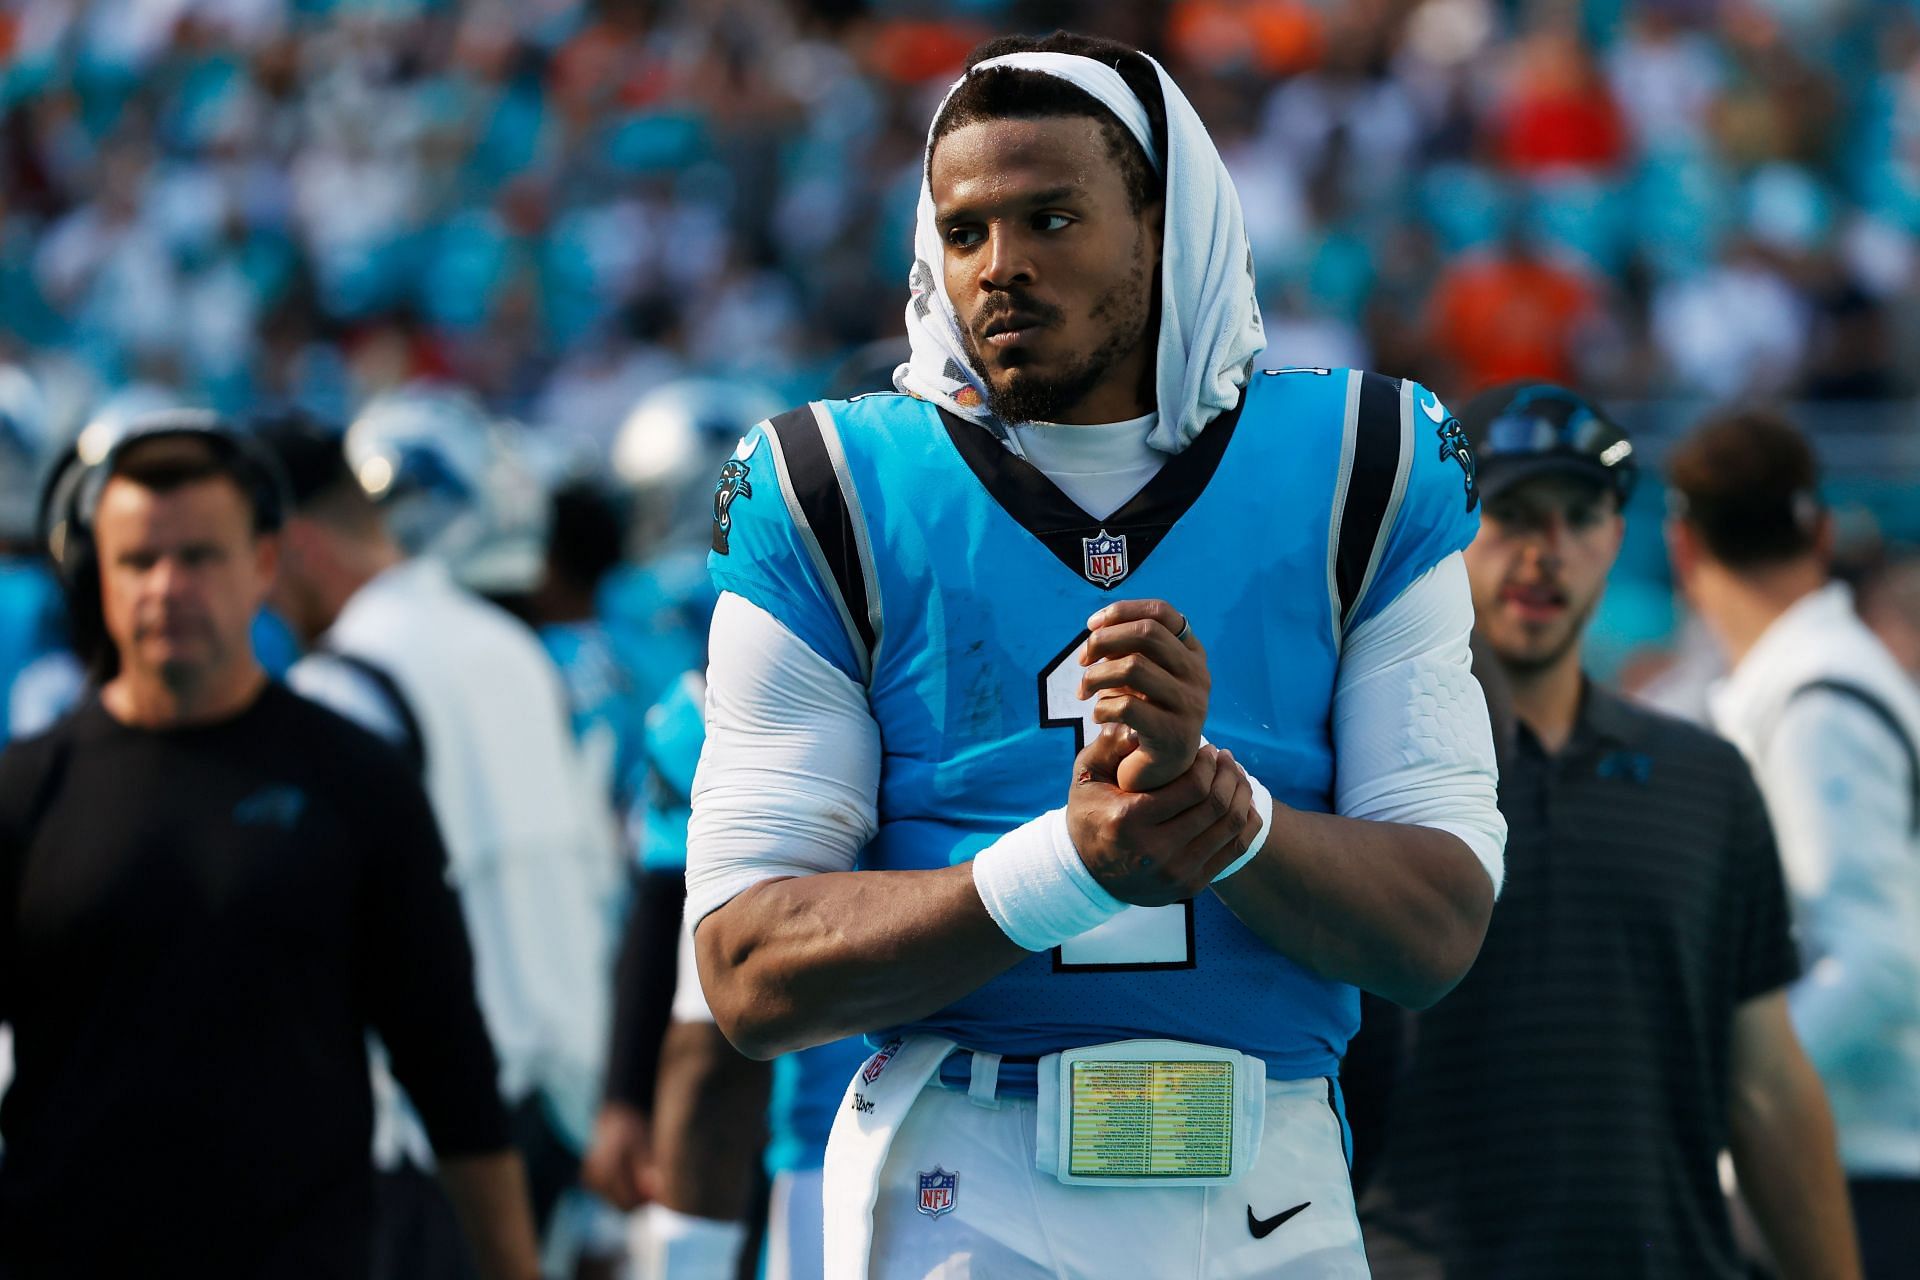 Could Cam Newton be an option for the Giants to replace Daniel Jones?